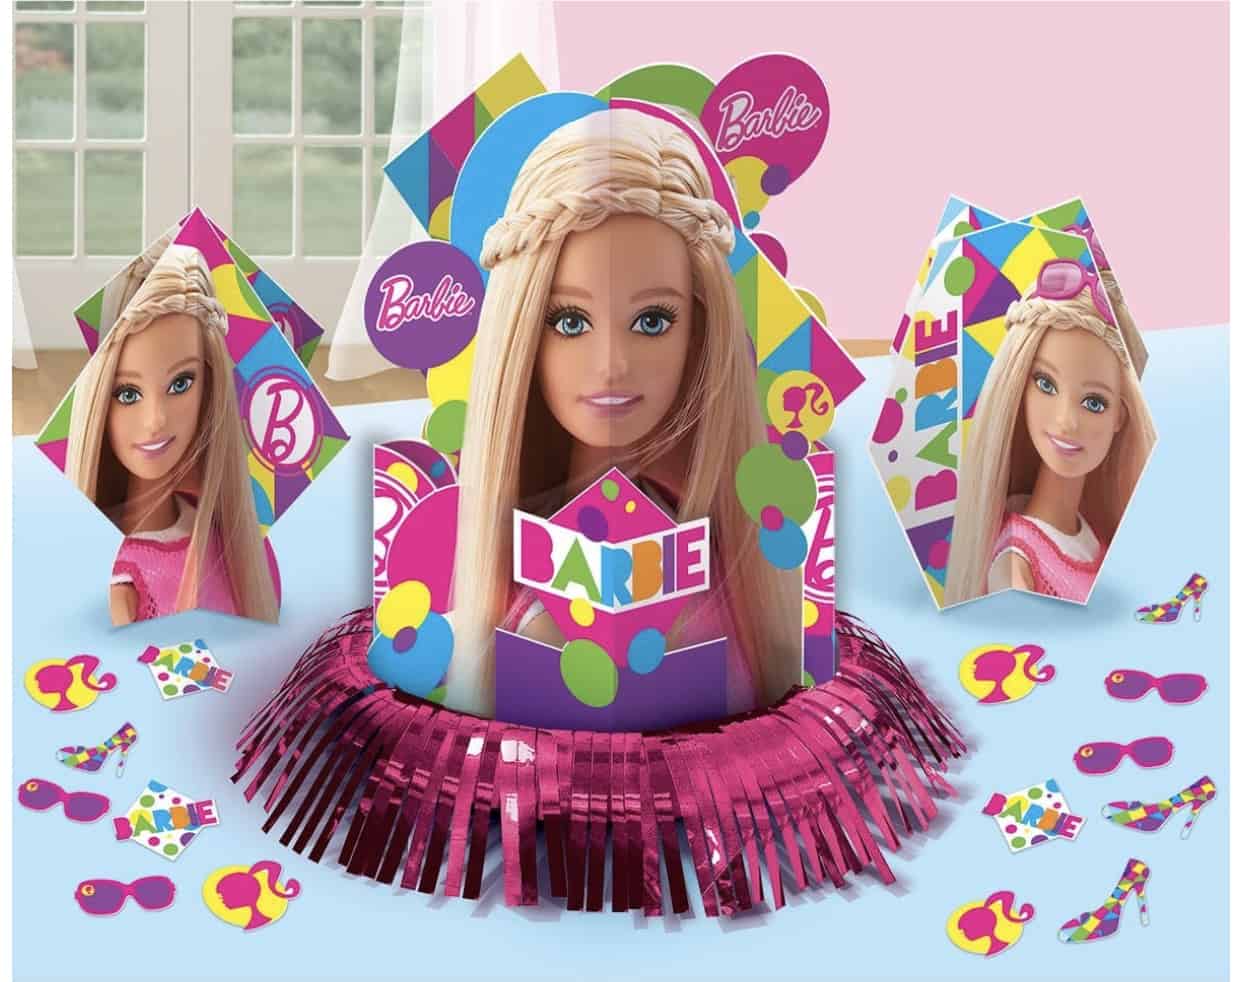 Birthday Birthday Party decorations and ideas. Save money on your Barbie Birthday Party. #barbie #birthday #party #barbiebirthdayparty #ideas #decorations 